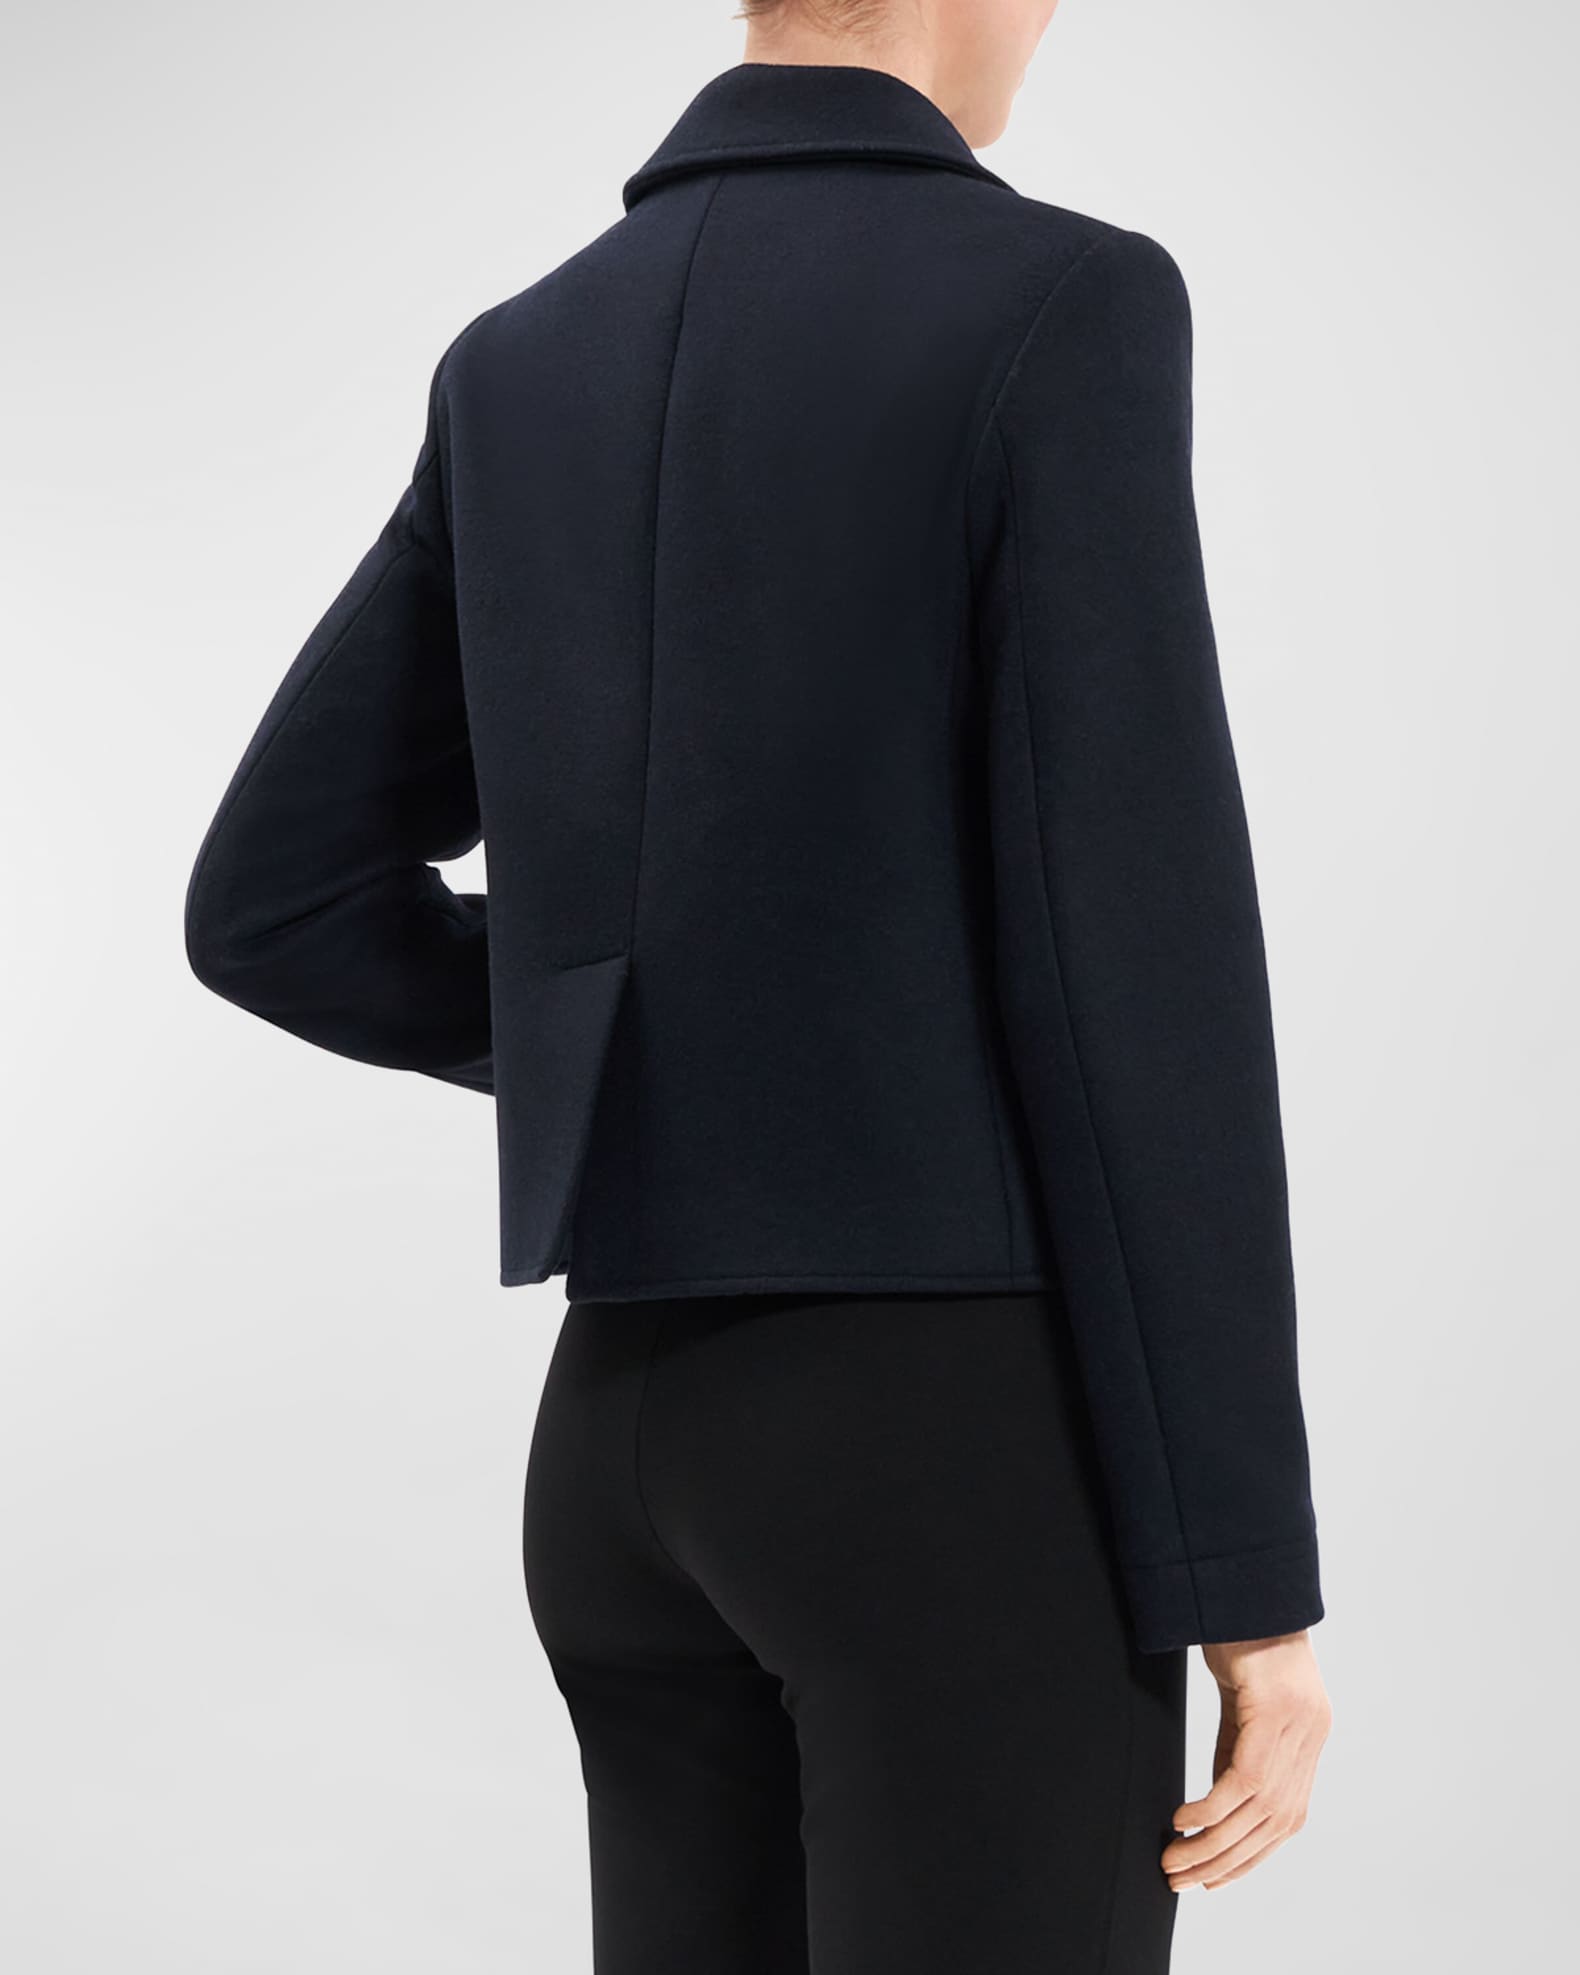 Theory Shrunken Wool Double-Breasted Peacoat | Neiman Marcus